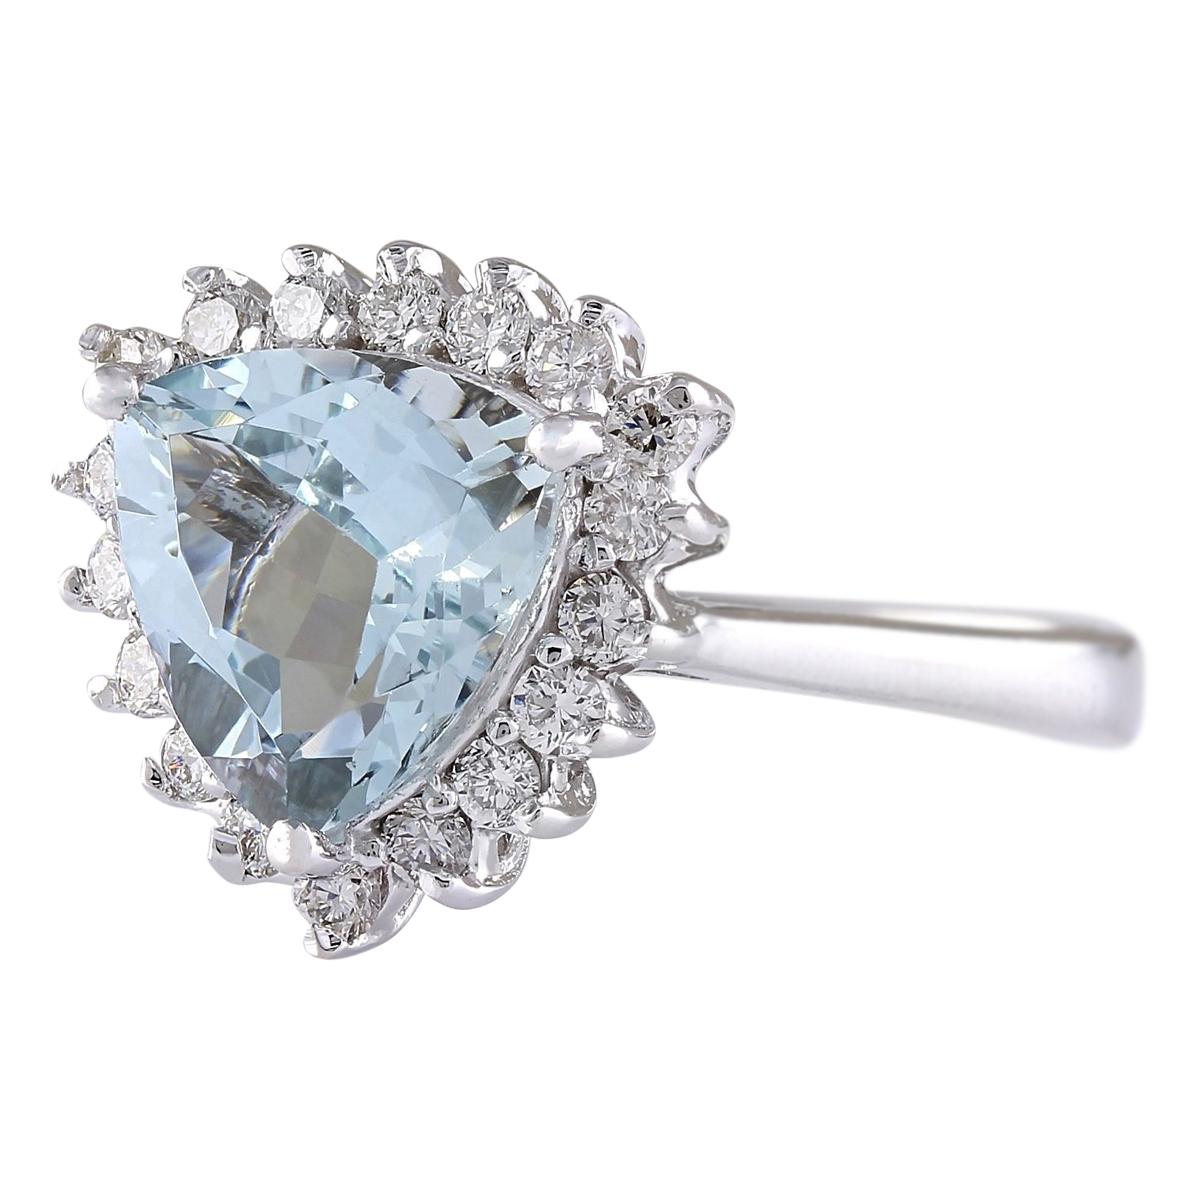 Stamped: 14K White Gold
Total Ring Weight: 5.3 Grams
Total Natural Aquamarine Weight is 2.75 Carat (Measures: 10.00x10.00 mm)
Total Natural Diamond Weight is 0.50 Carat
Color: F-G, Clarity: VS2-SI1
Face Measures: 14.60x14.80 mm
Sku: [703748W]